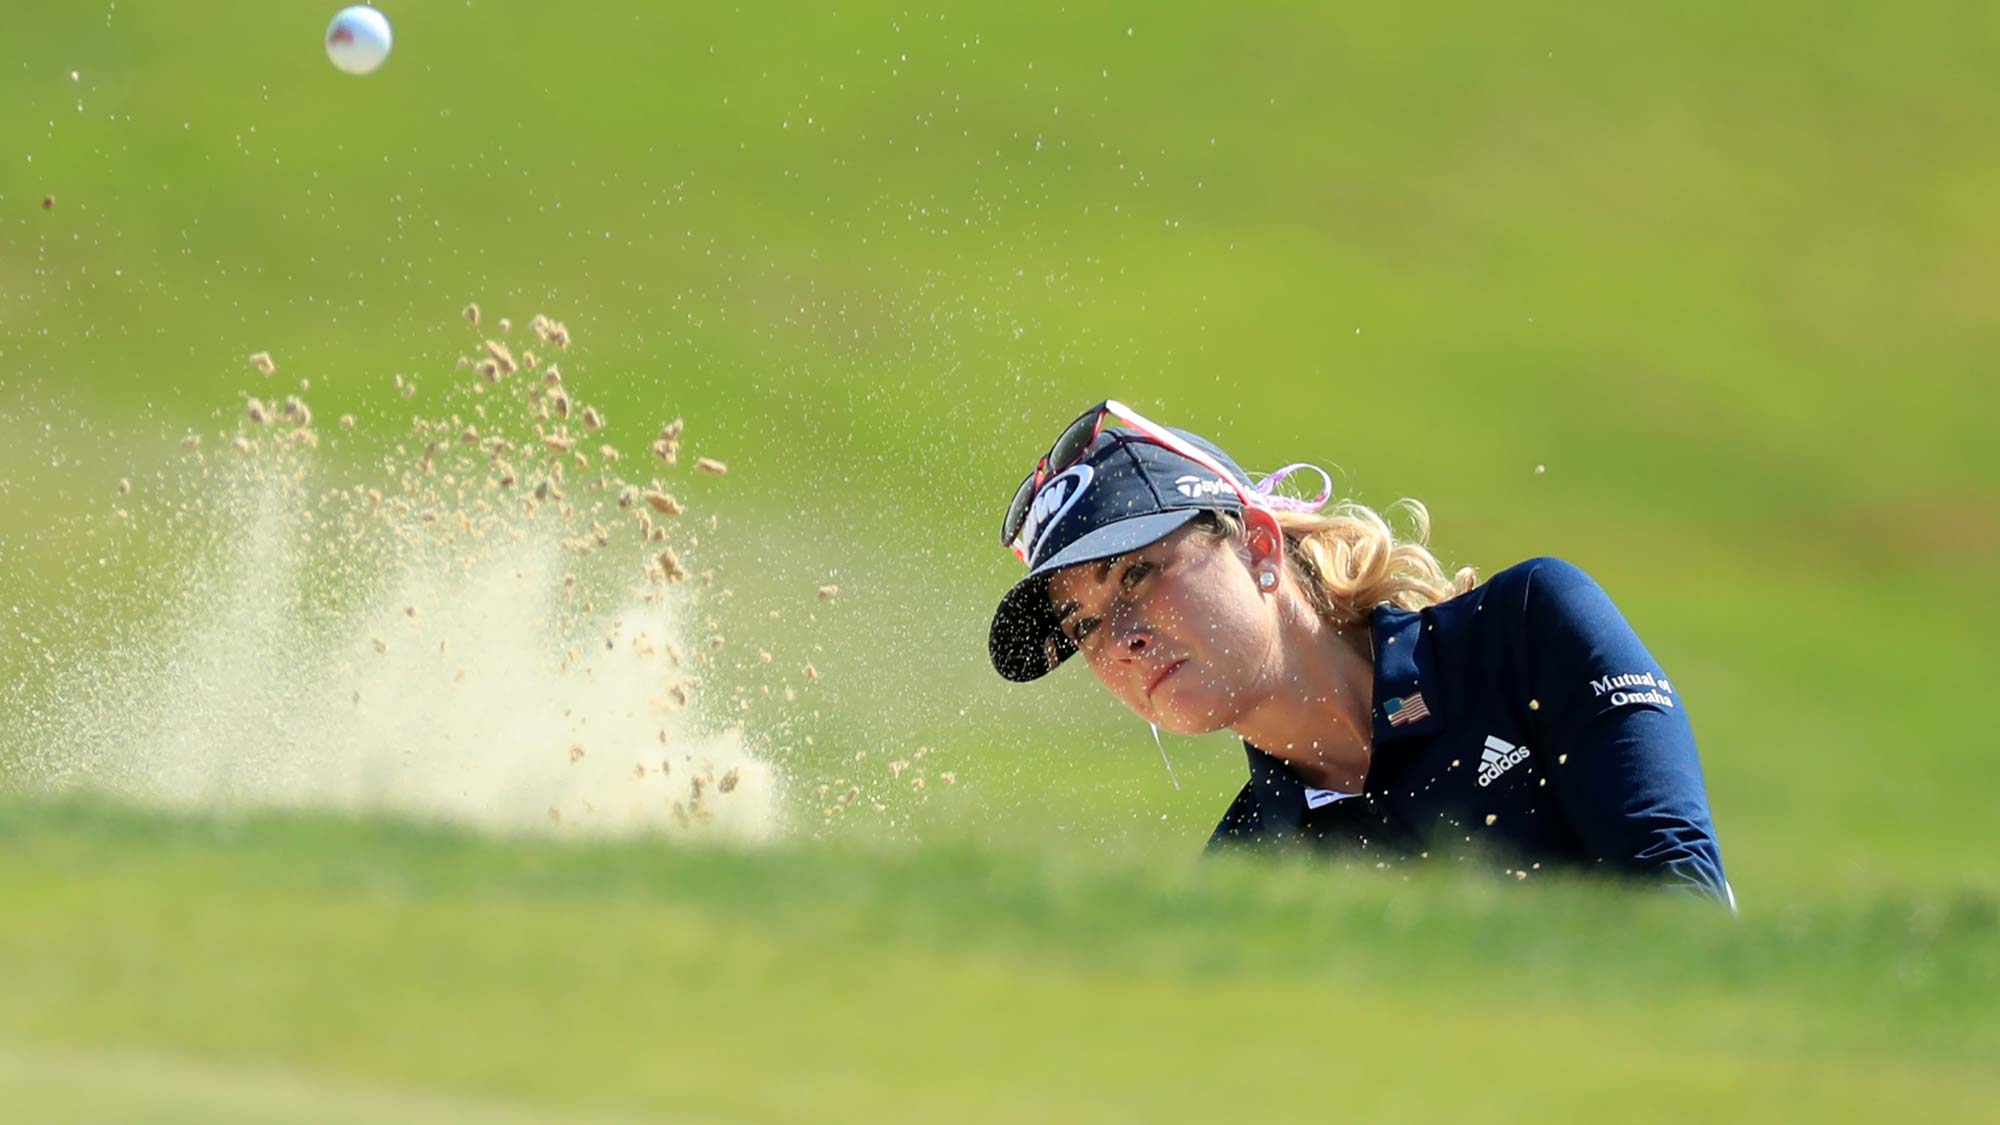 Paula Creamer hits out of a bunker on the 18th hole during the second round of the Pure Silk Championship 